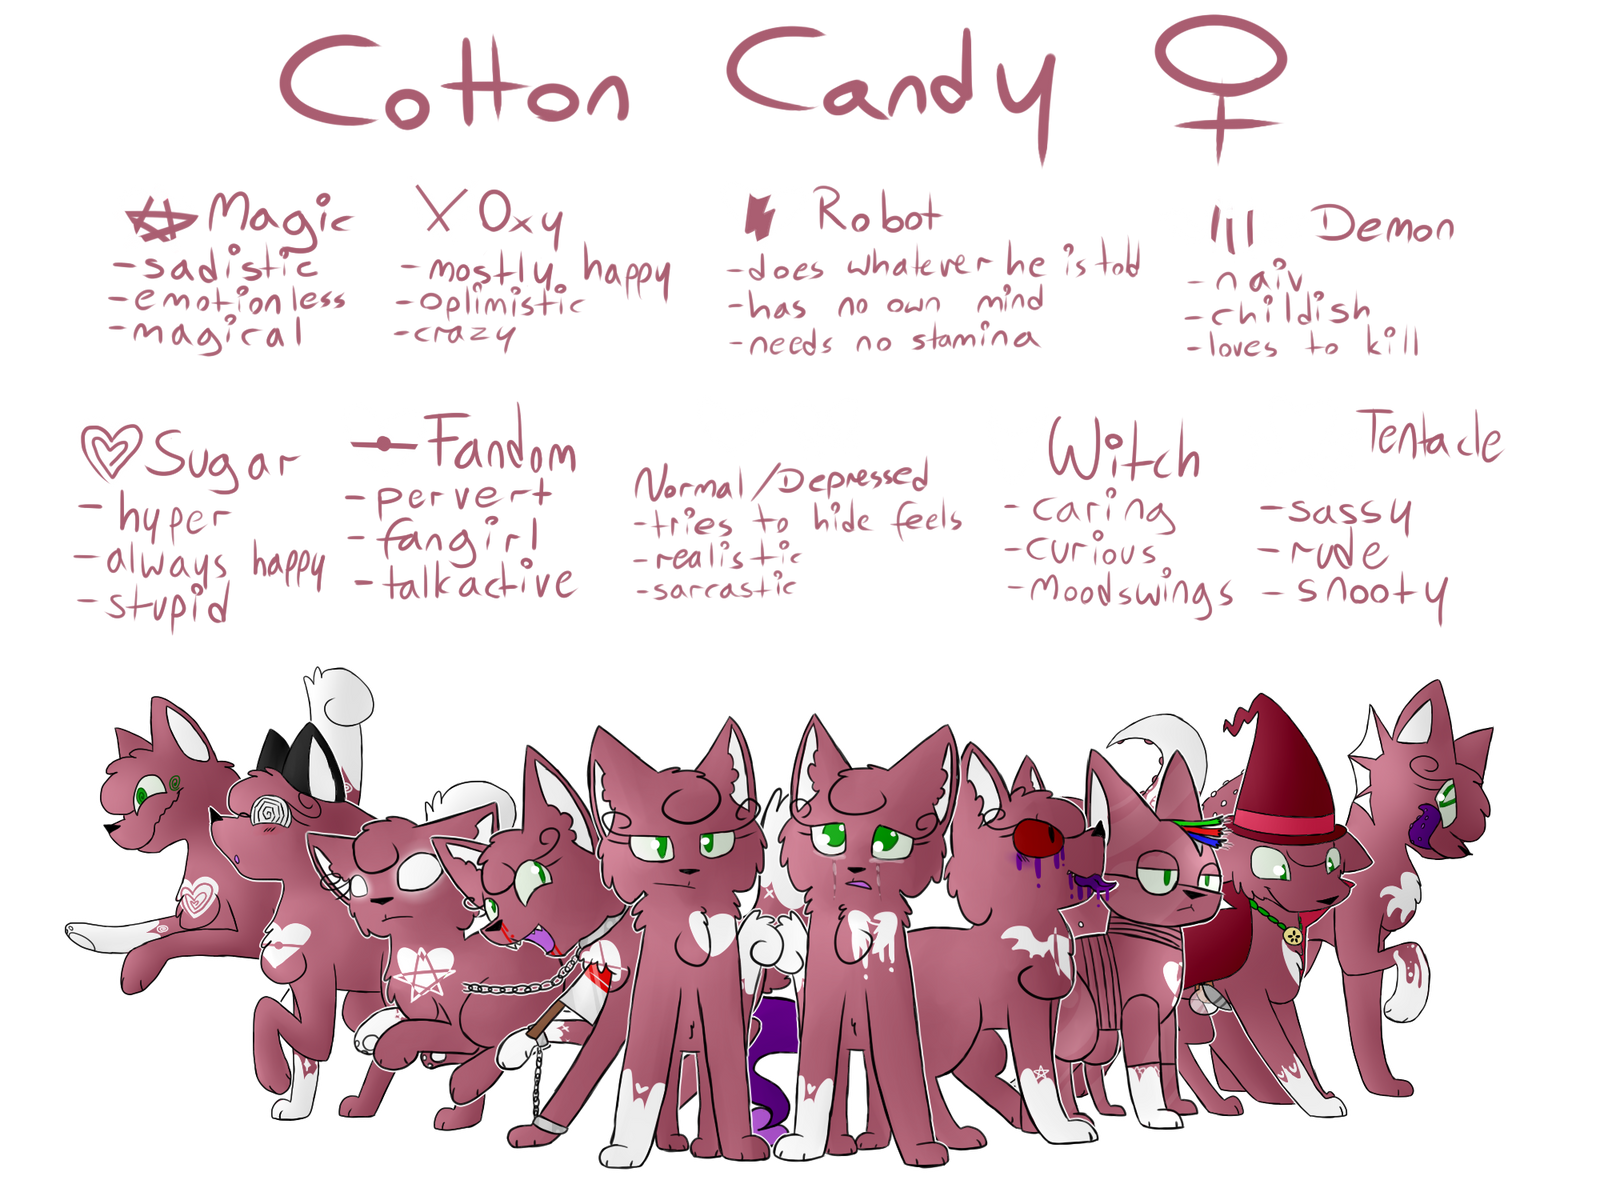 Cotton Candy ref